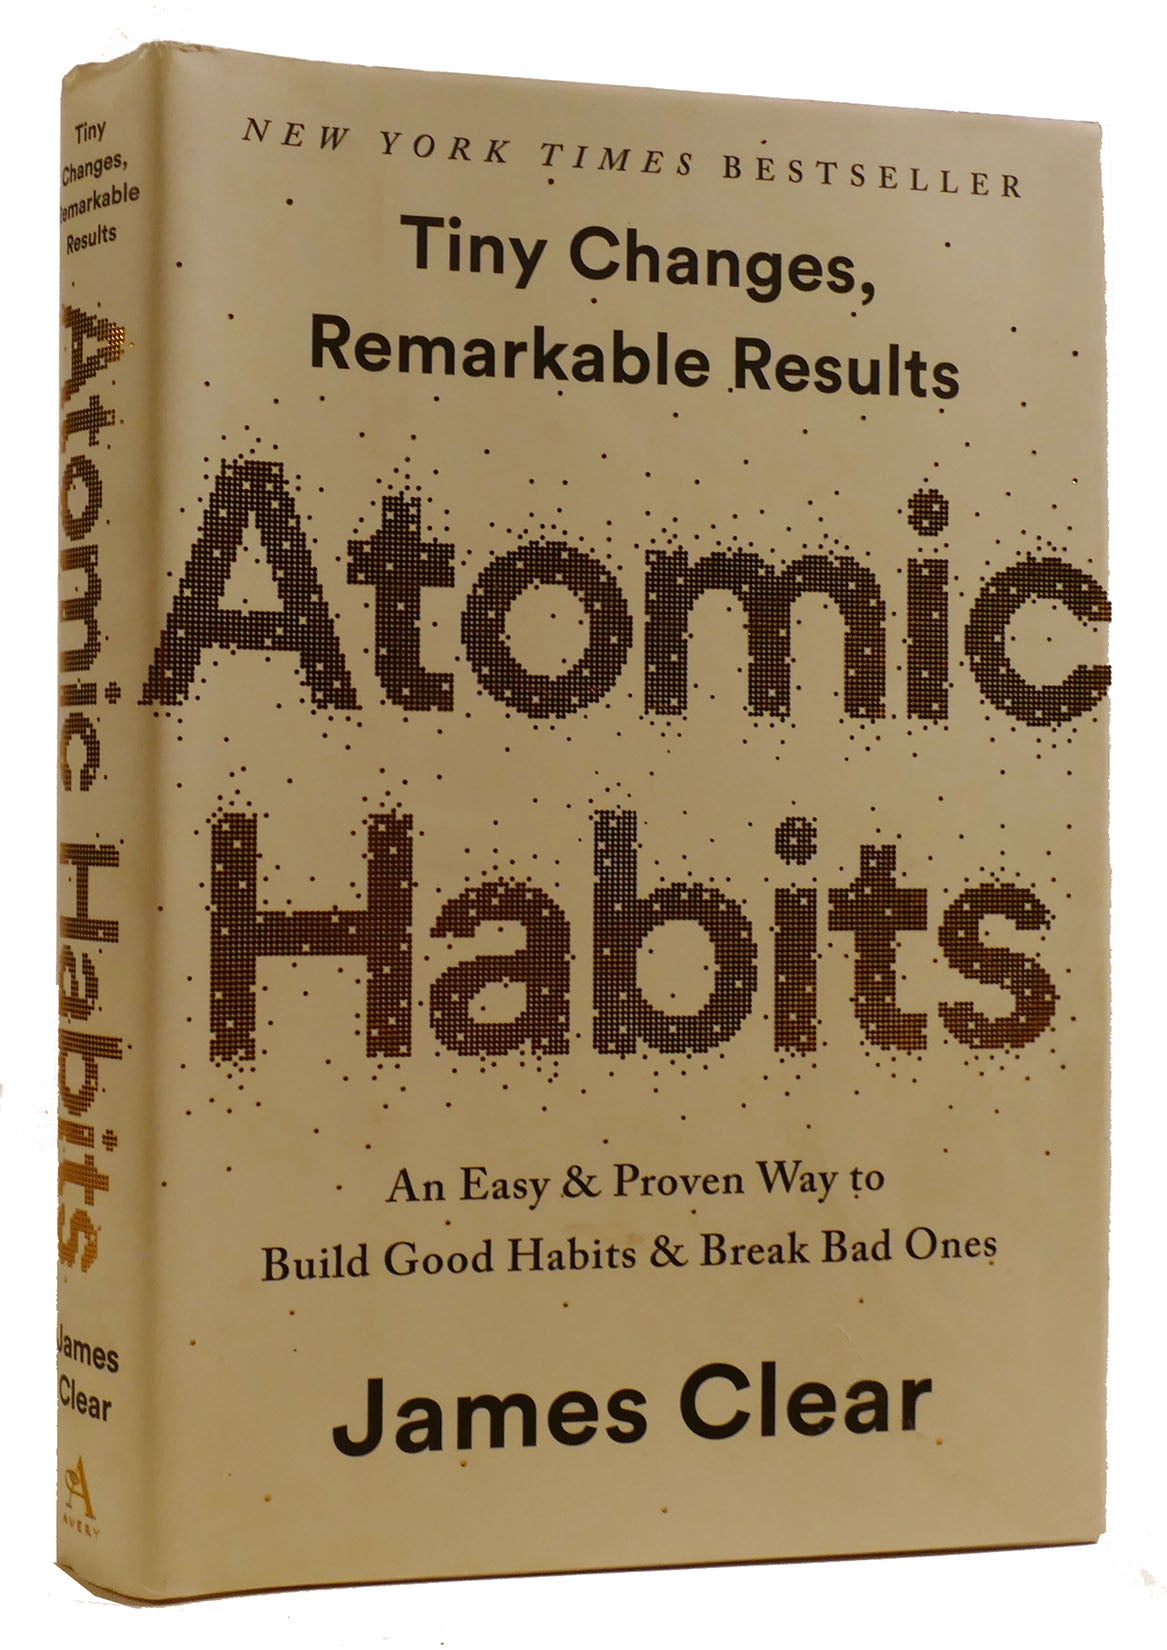 Atomic Habits: Tiny Changes, Remarkable Results by James Clear